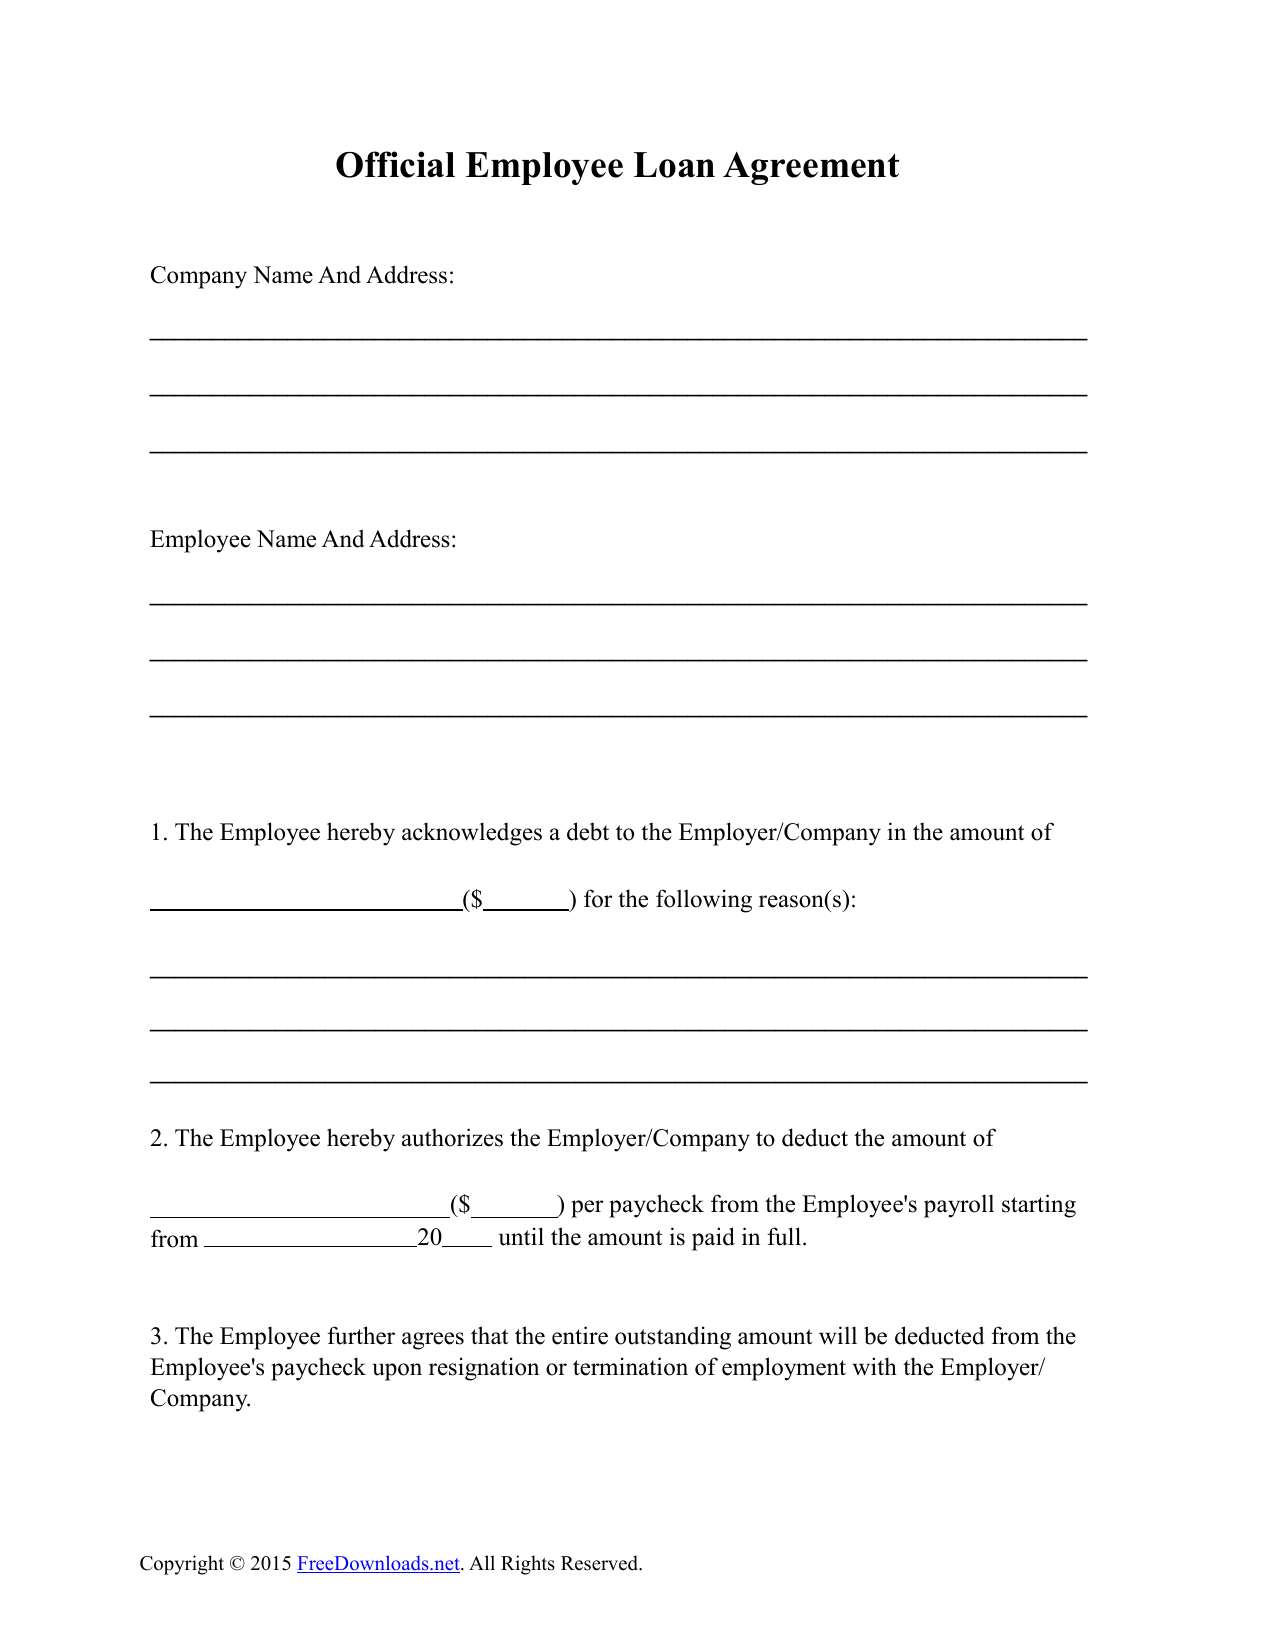 Collateral Loan Agreement Template Download Employee Loan Agreement Template Pdf Rtf Word